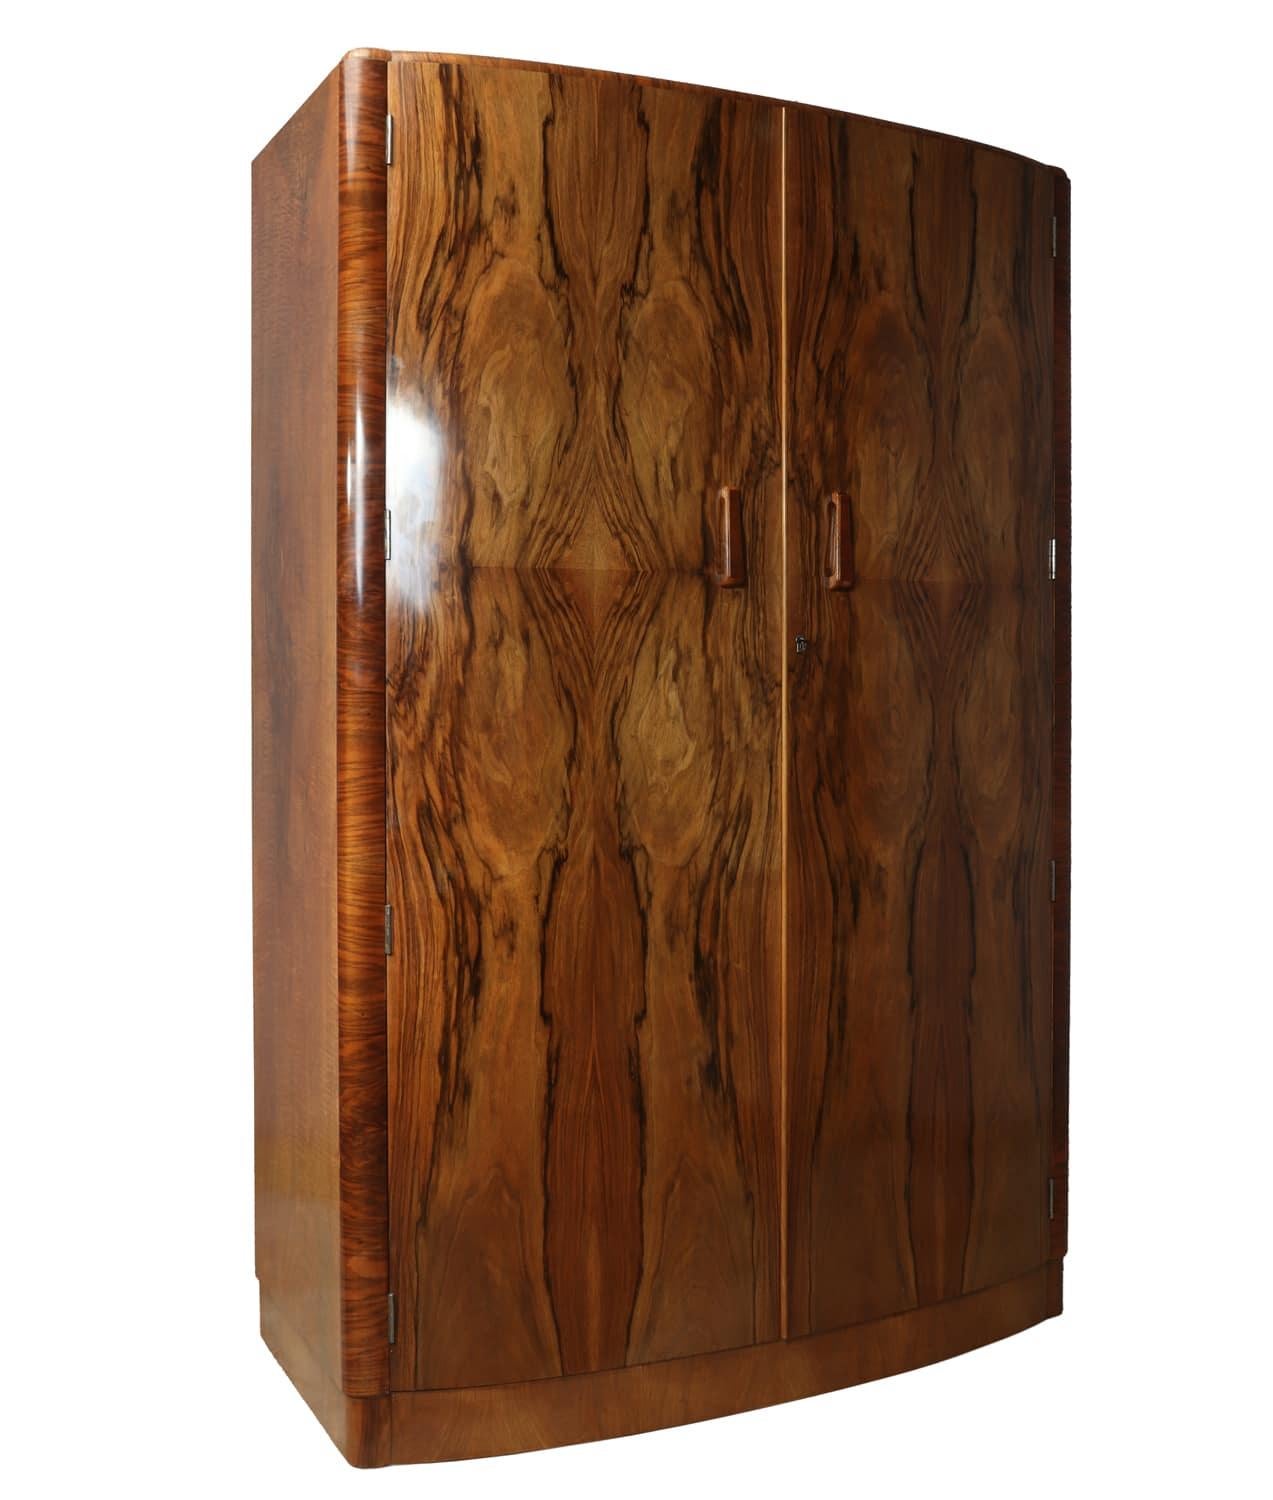 Art Deco bow fronted walnut two-door wardrobe
A Walnut Art Deco wardrobe in figured walnut with two hanging rails, the wardrobe has been professionally polished in excellent condition throughout

Age: 1930

Style: Art Deco

Material: